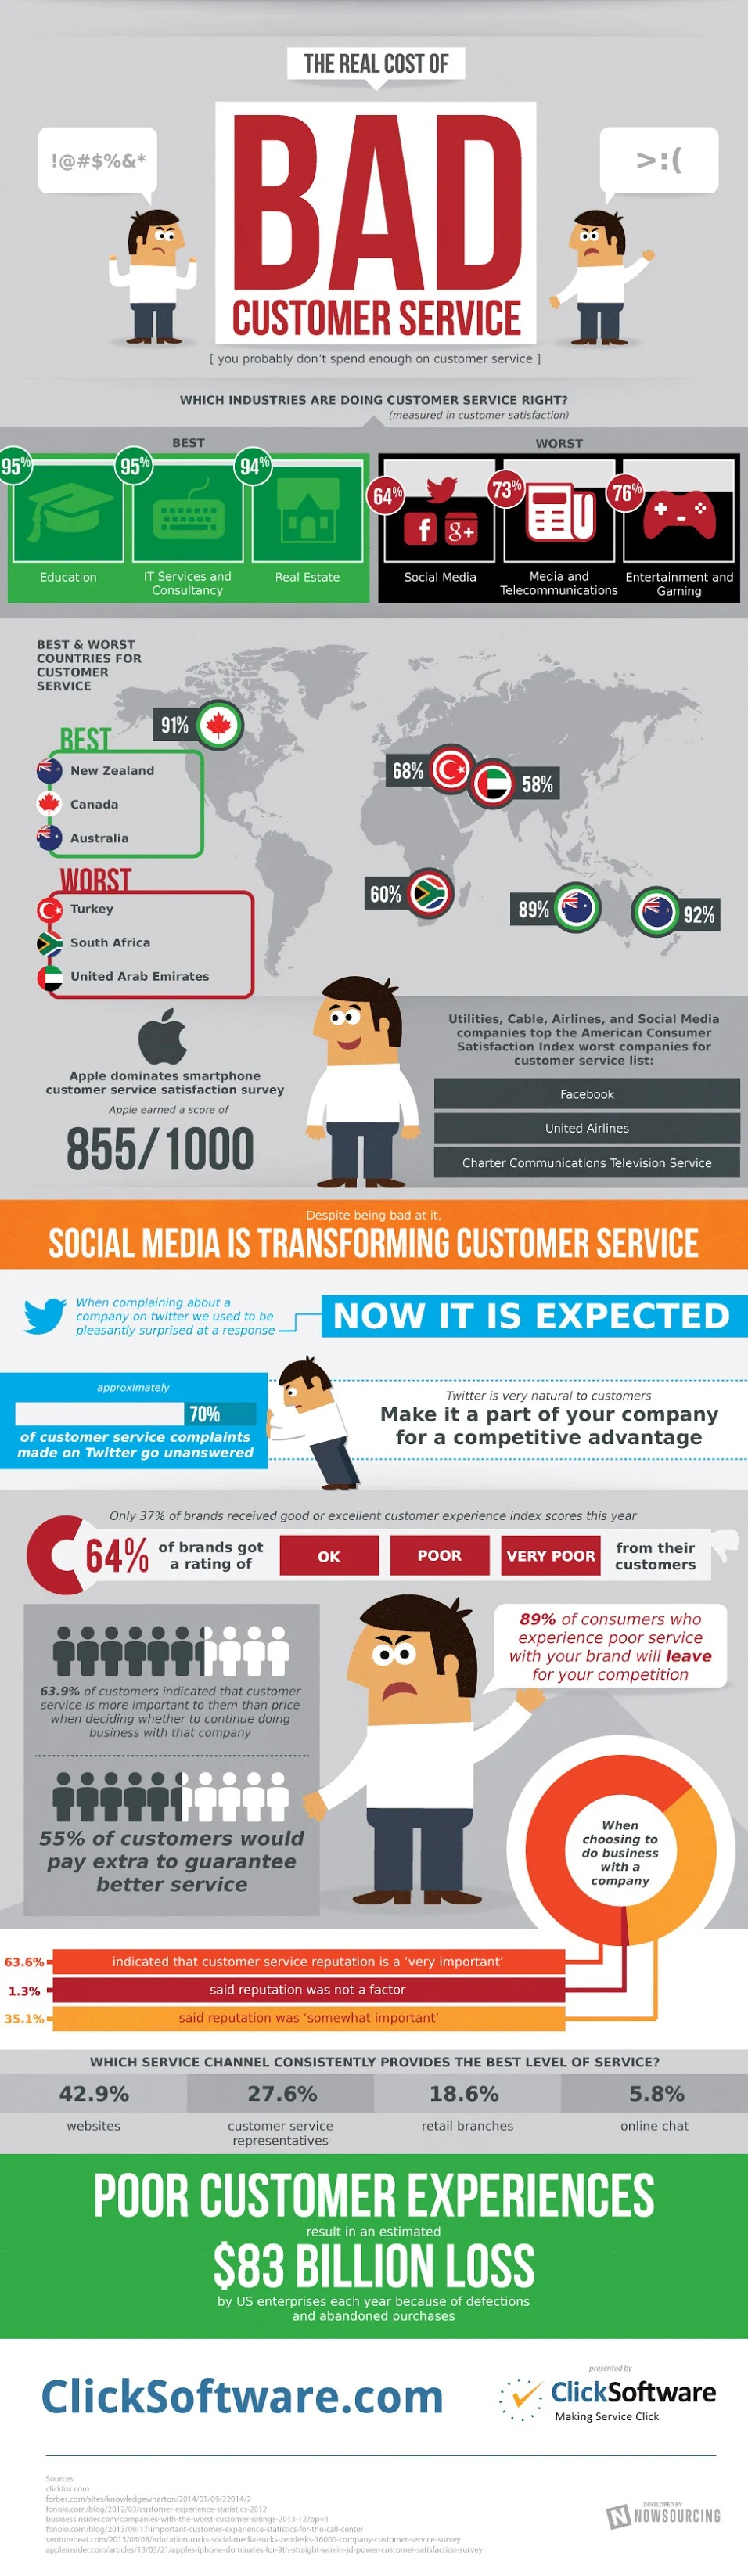 The Real Cost of Bad Customer Service - infographic